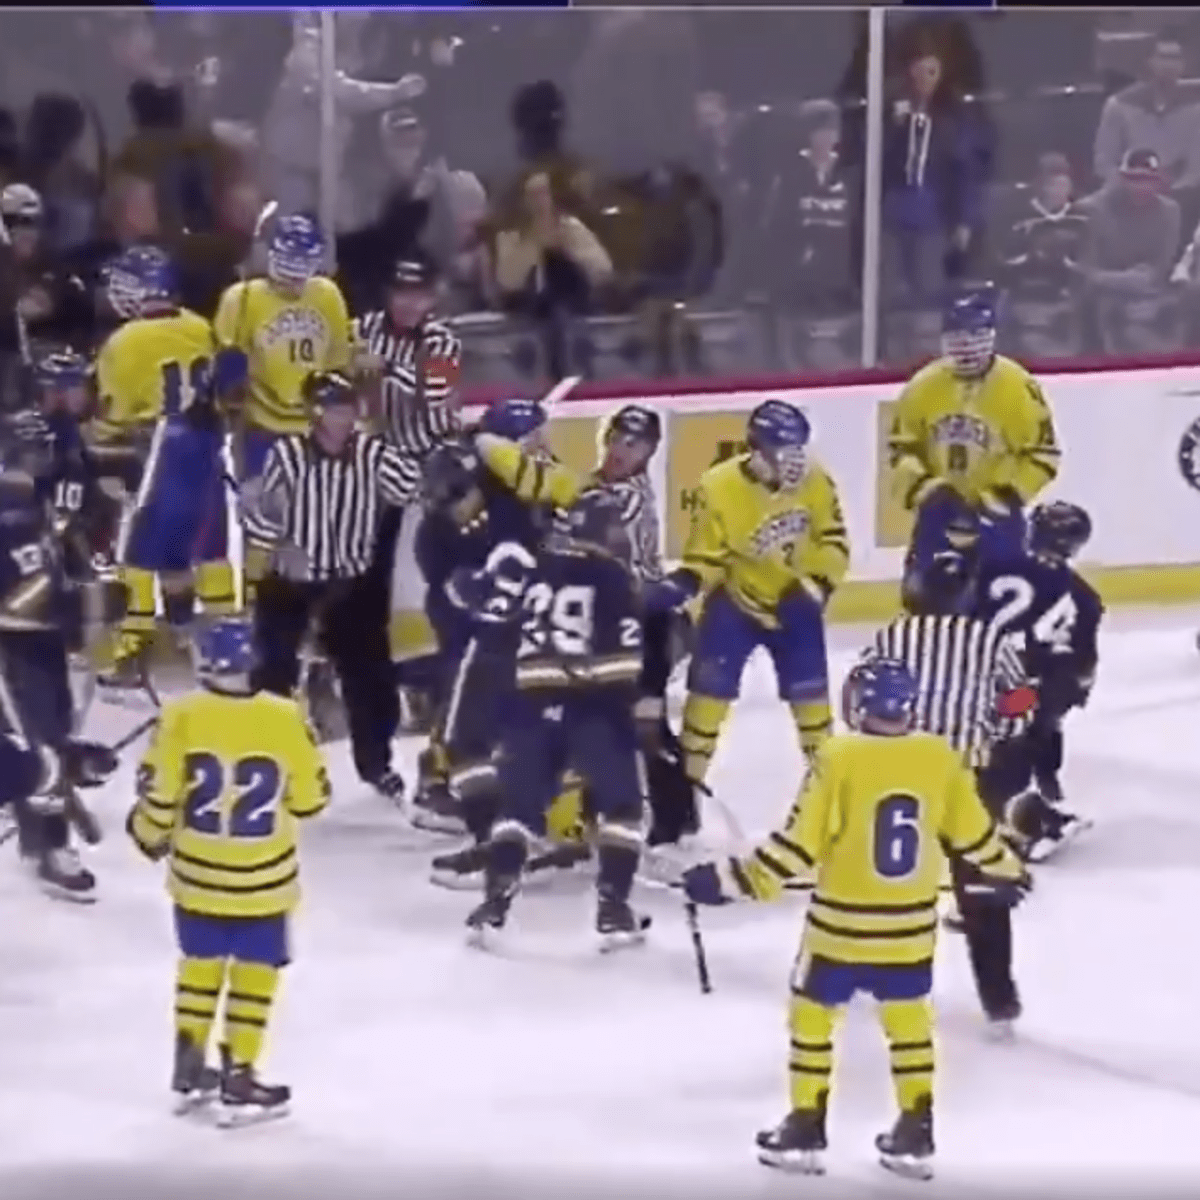 Full bench brawl nearly breaks out at Minnesota state hockey tournament